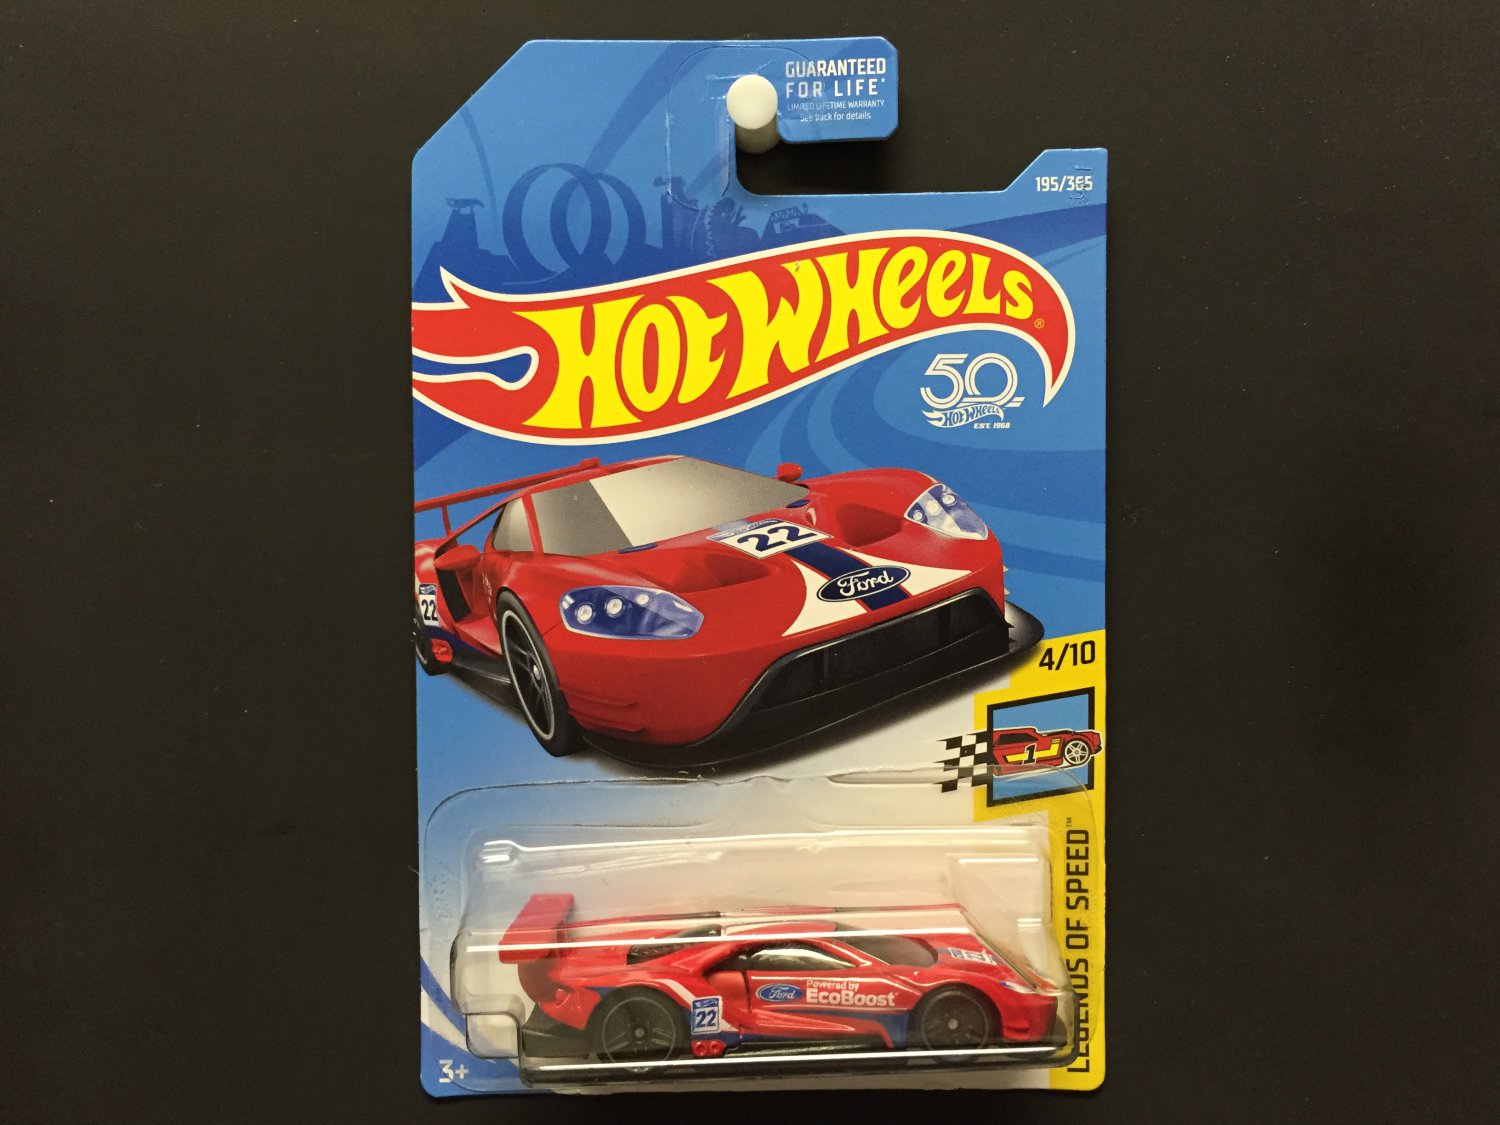 hot wheels 2016 ford gt race red